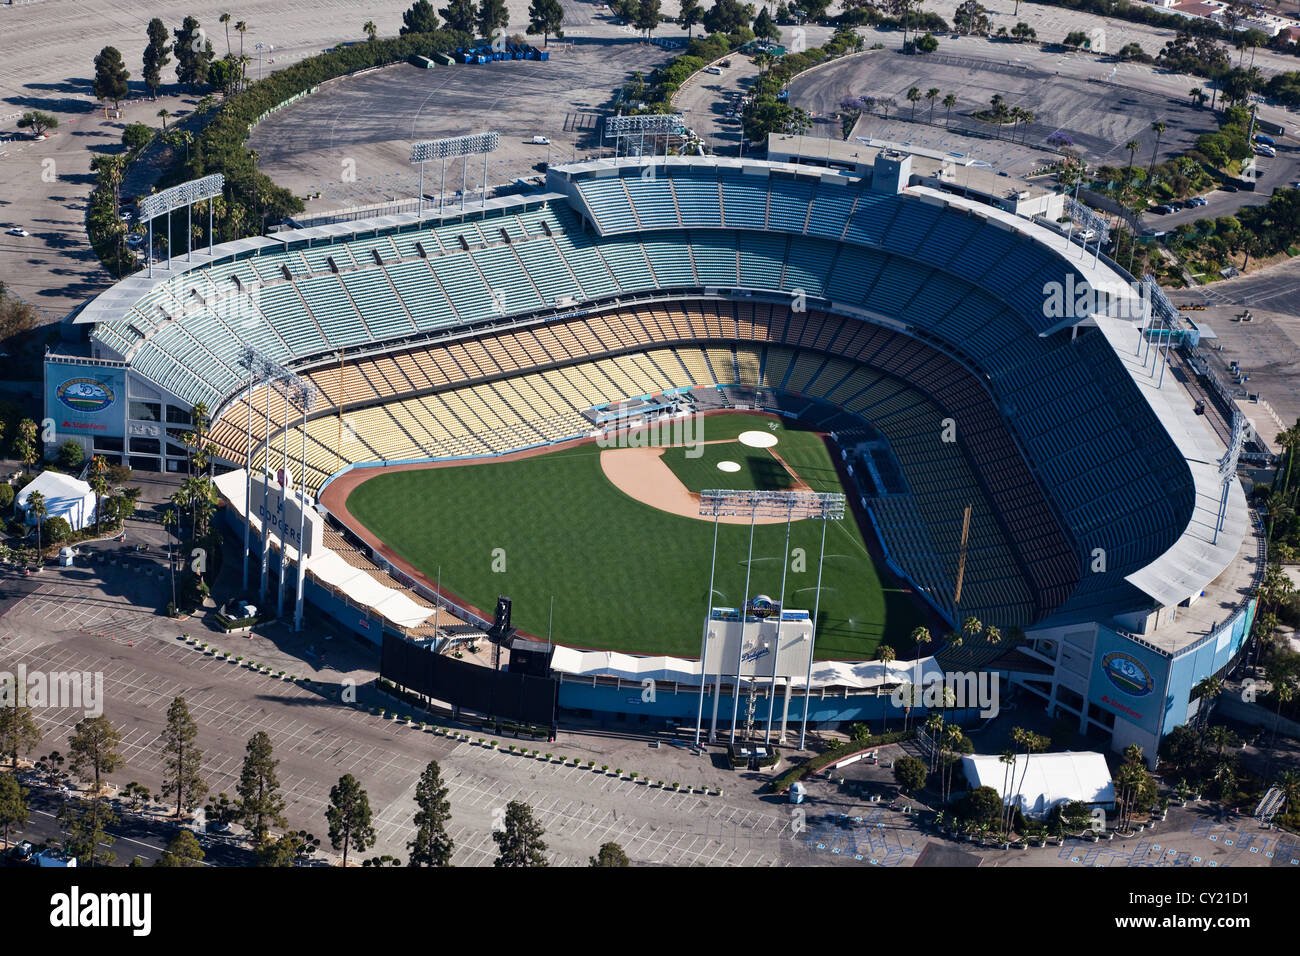 The massive Dodger Stadium has the largest seating capacity in the world. Stock Photo